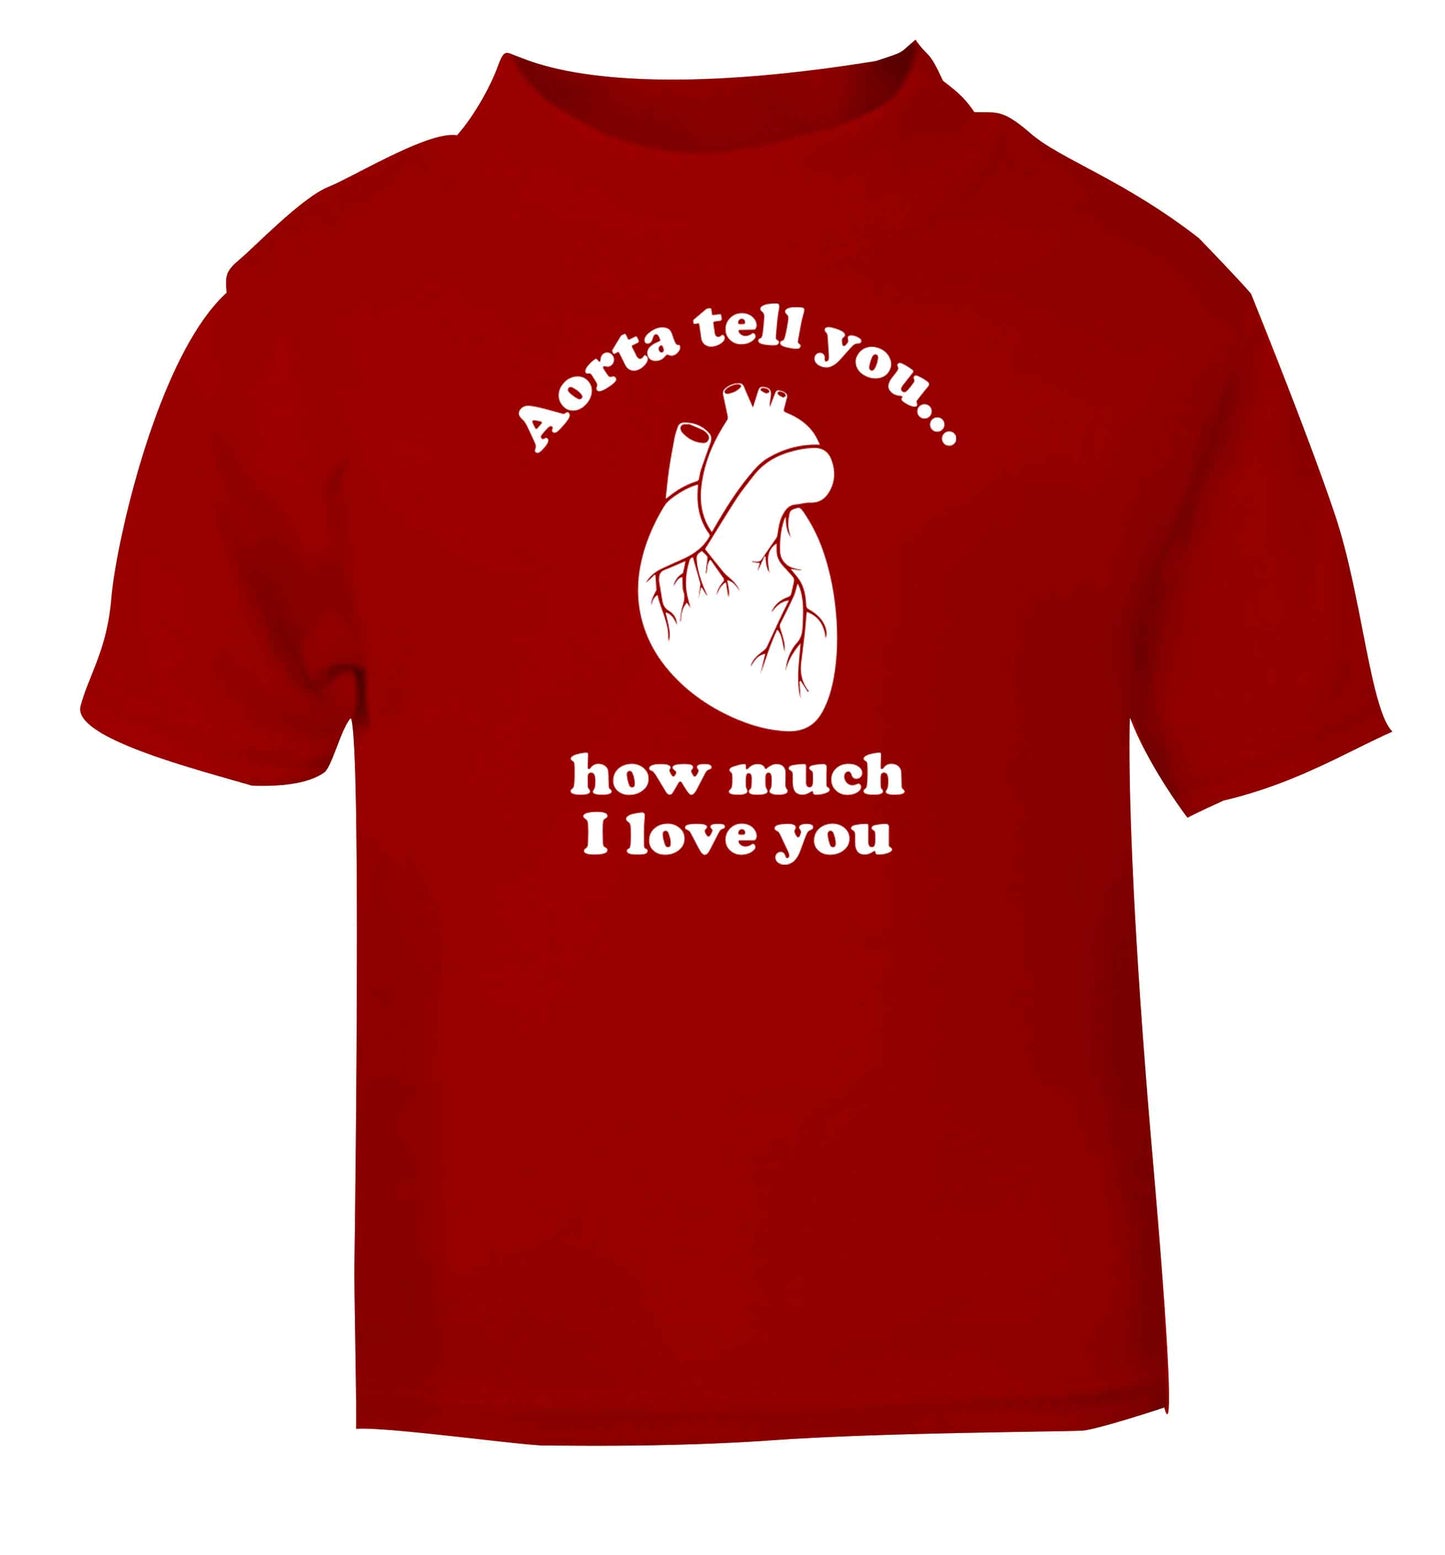 Aorta tell you how much I love you red baby toddler Tshirt 2 Years